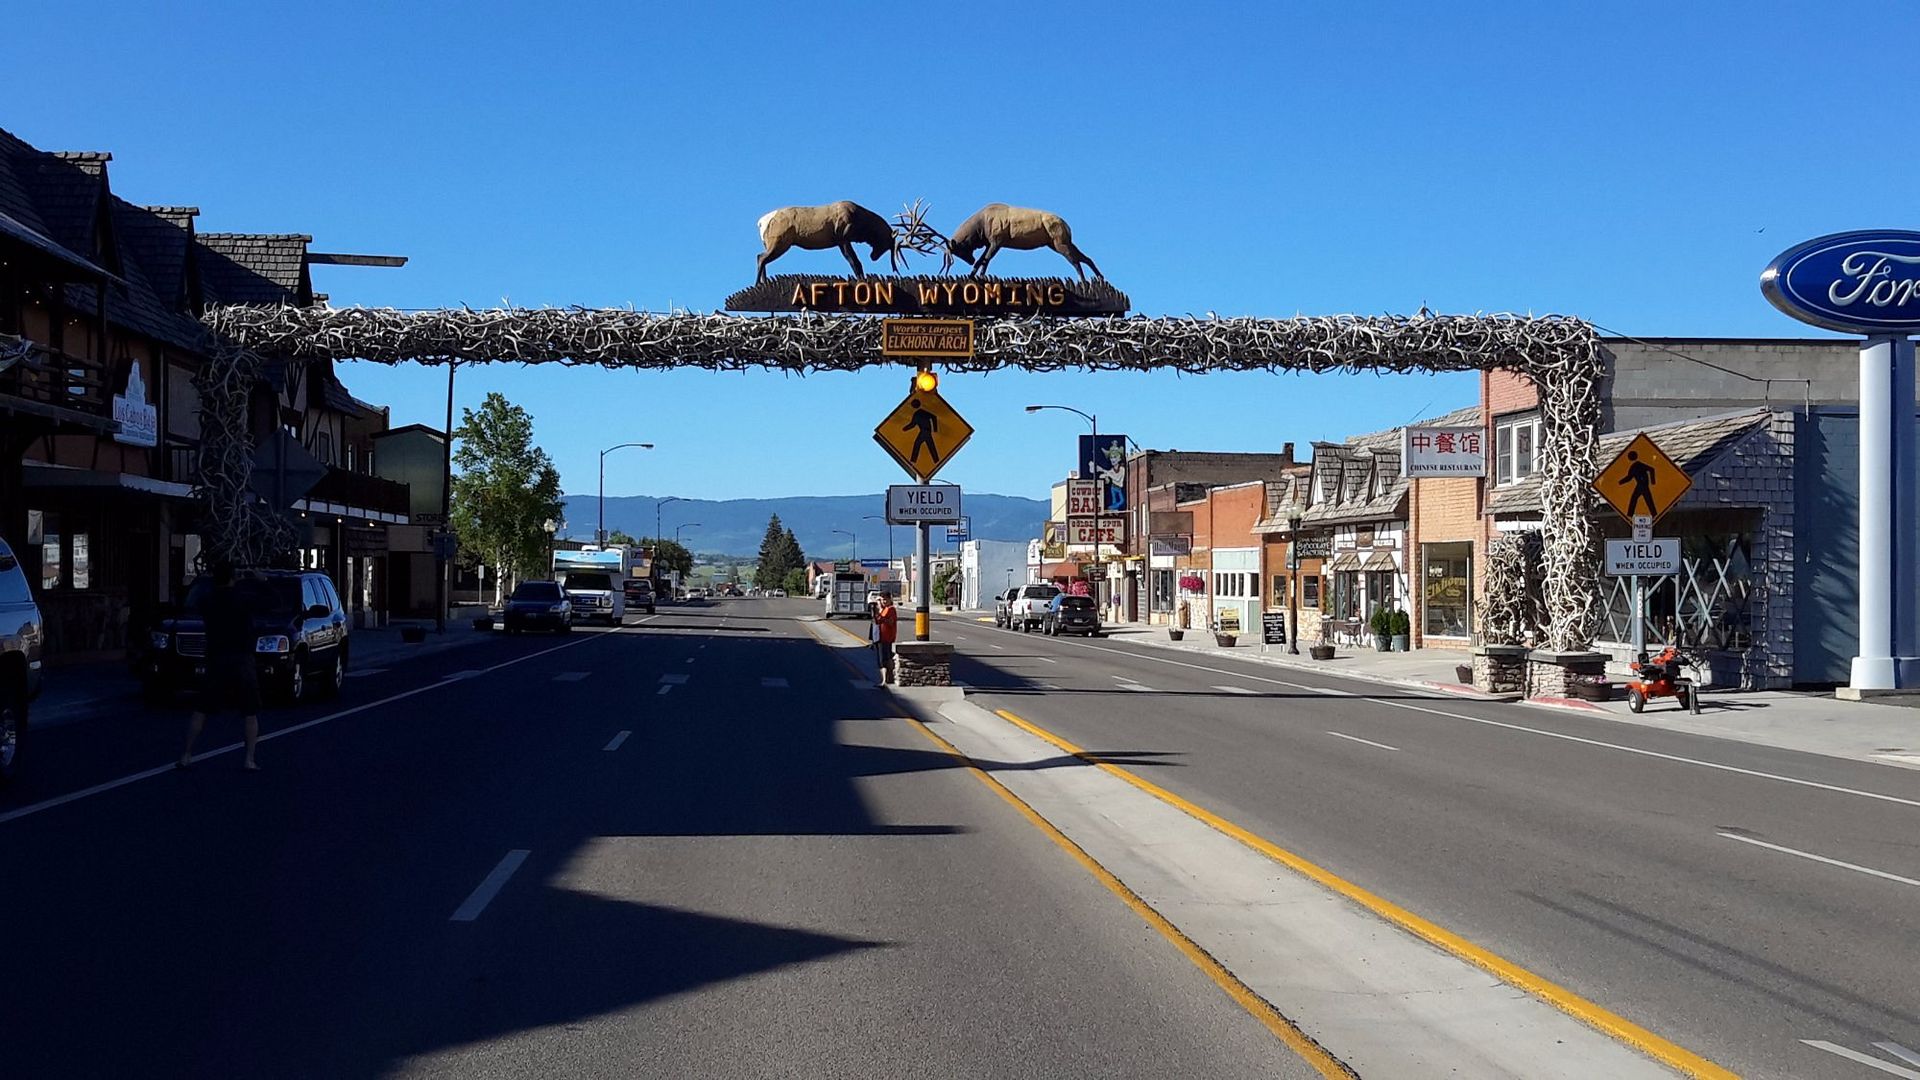 
World's Largest Elkhorn Arch, world record in Afton, Wyoming